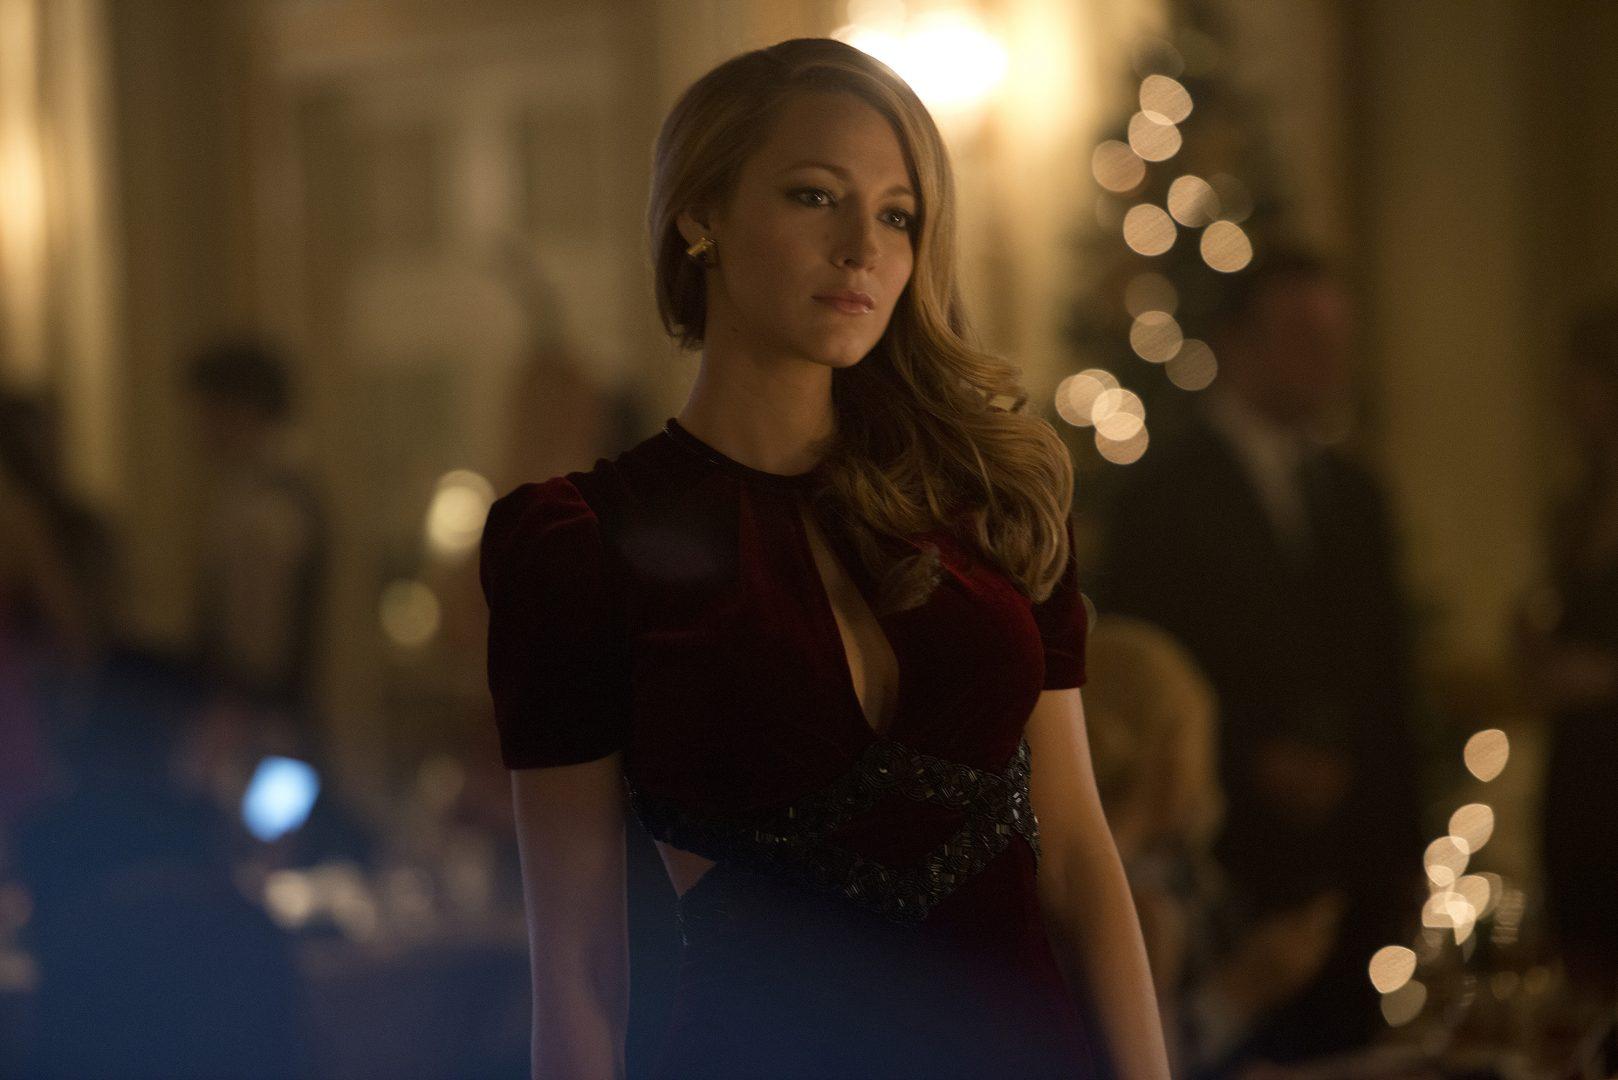 Blake Lively stars in The Age of Adaline. (Diyah Pera/Lionsgate)